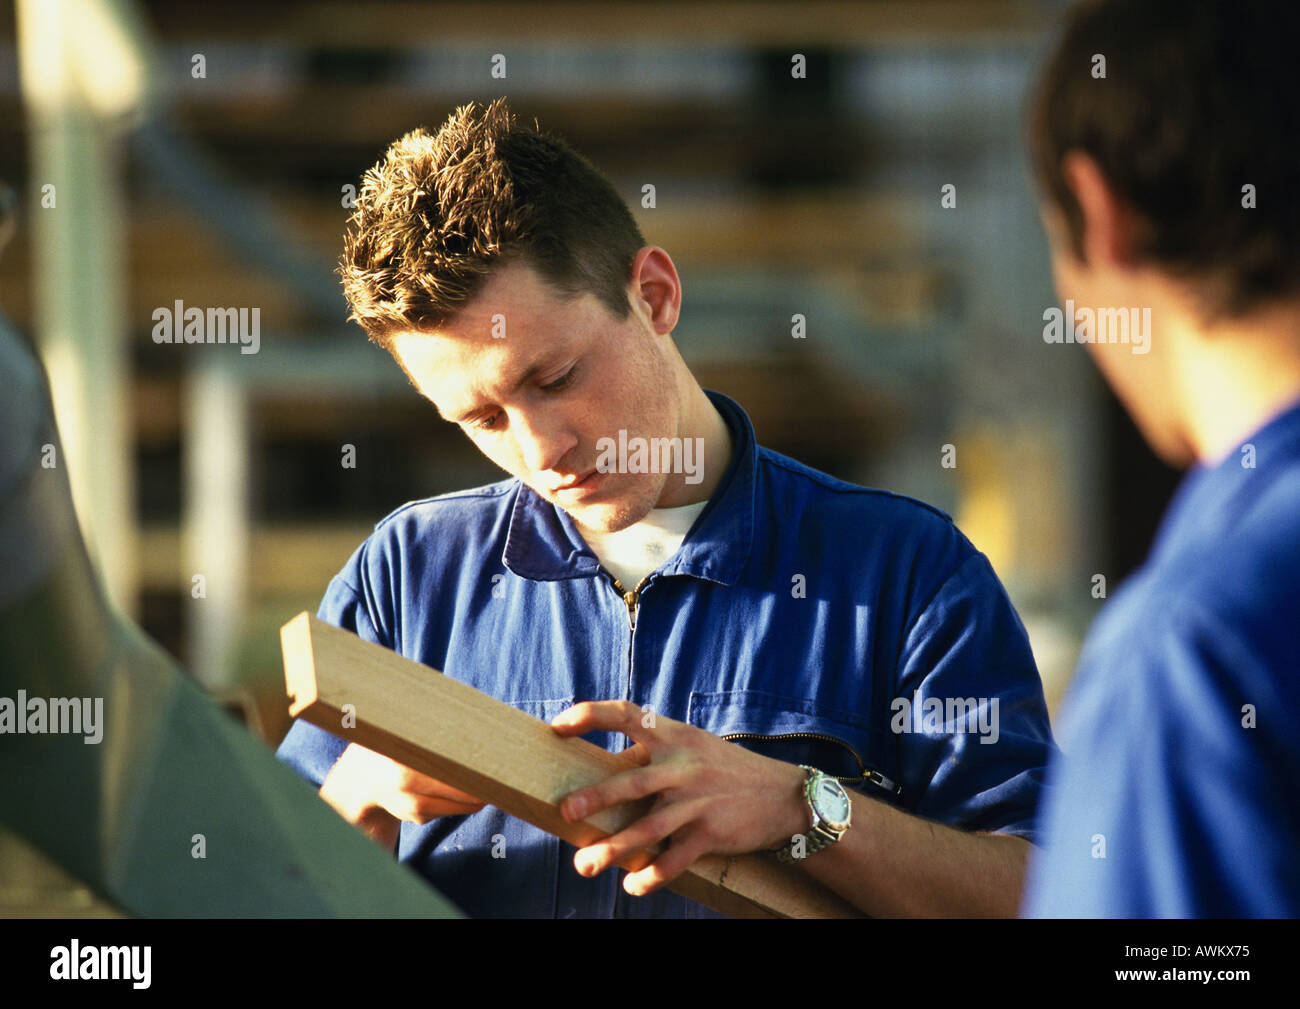 Man in blue coveralls holding plank of wood, second man rear view, blurred in foreground Stock Photo